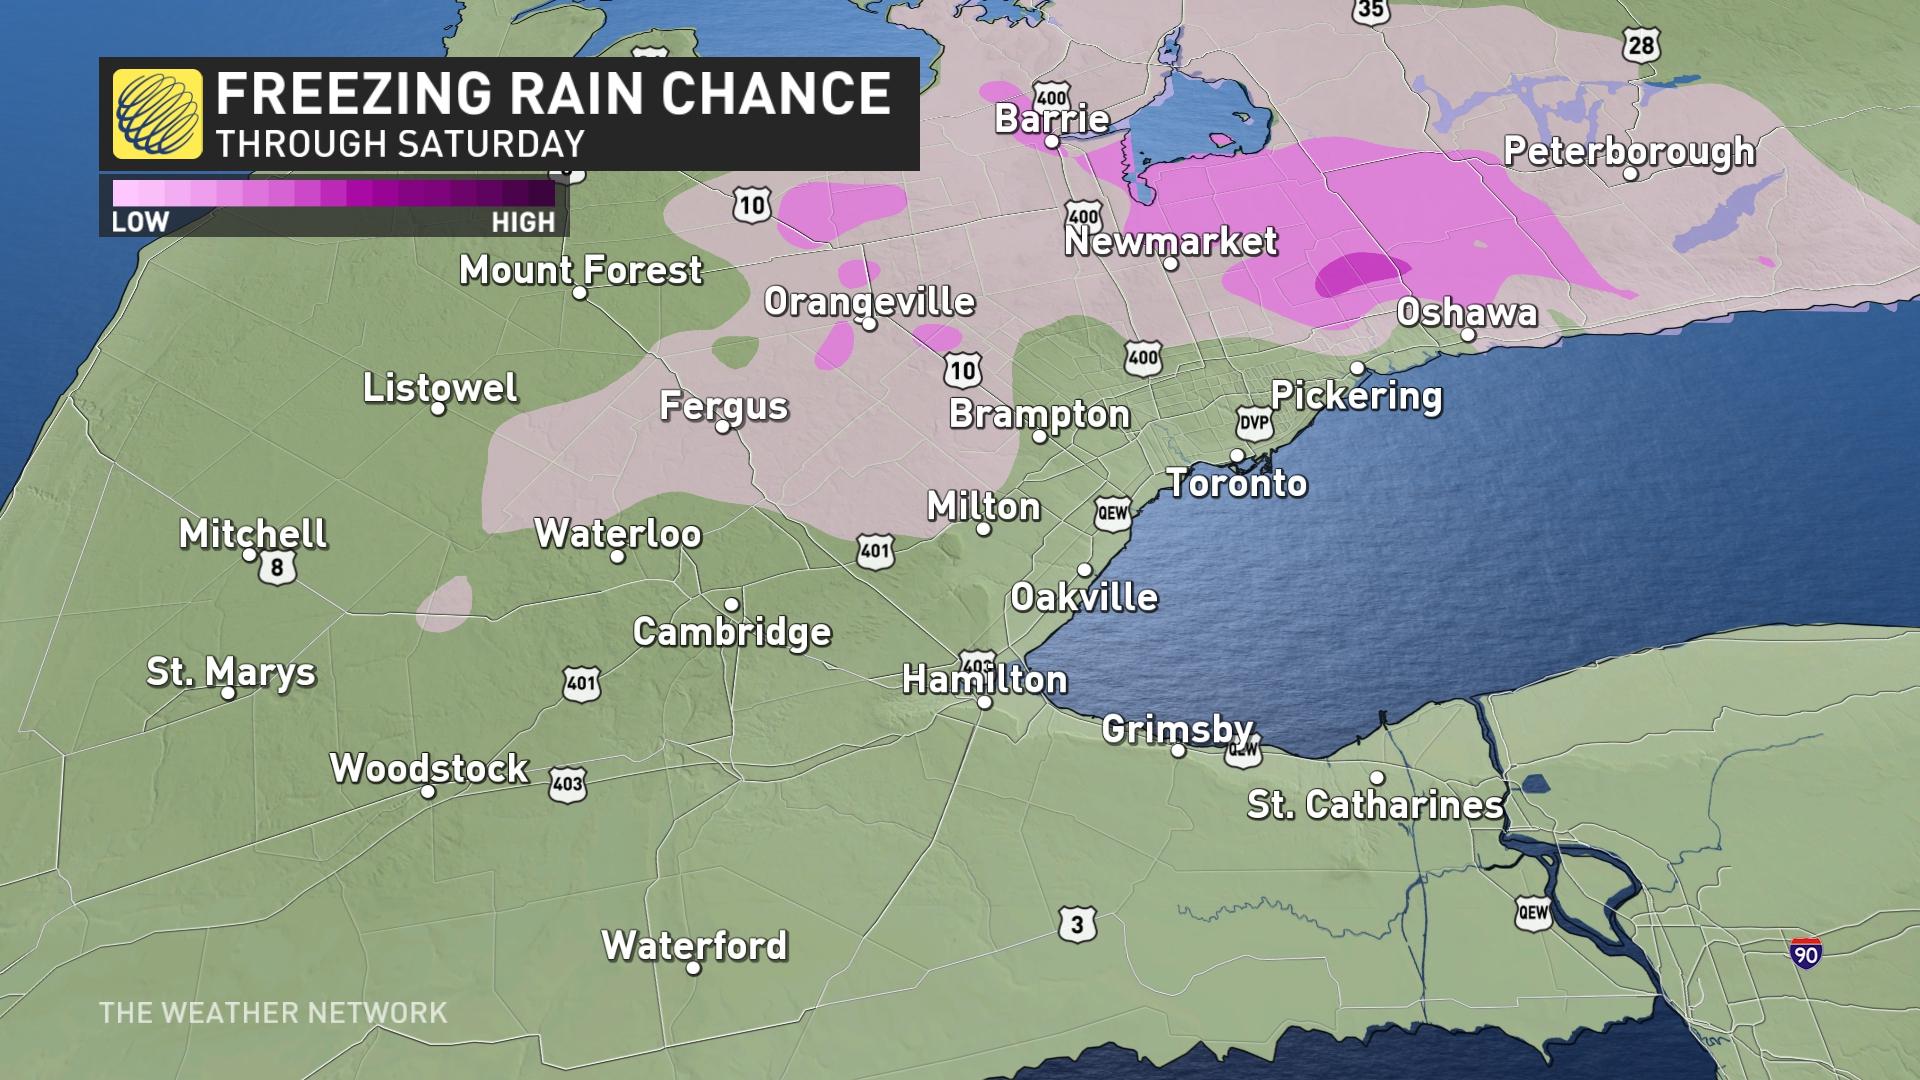 dicey start to ontario's holiday season as freezing rain makes for slick roads